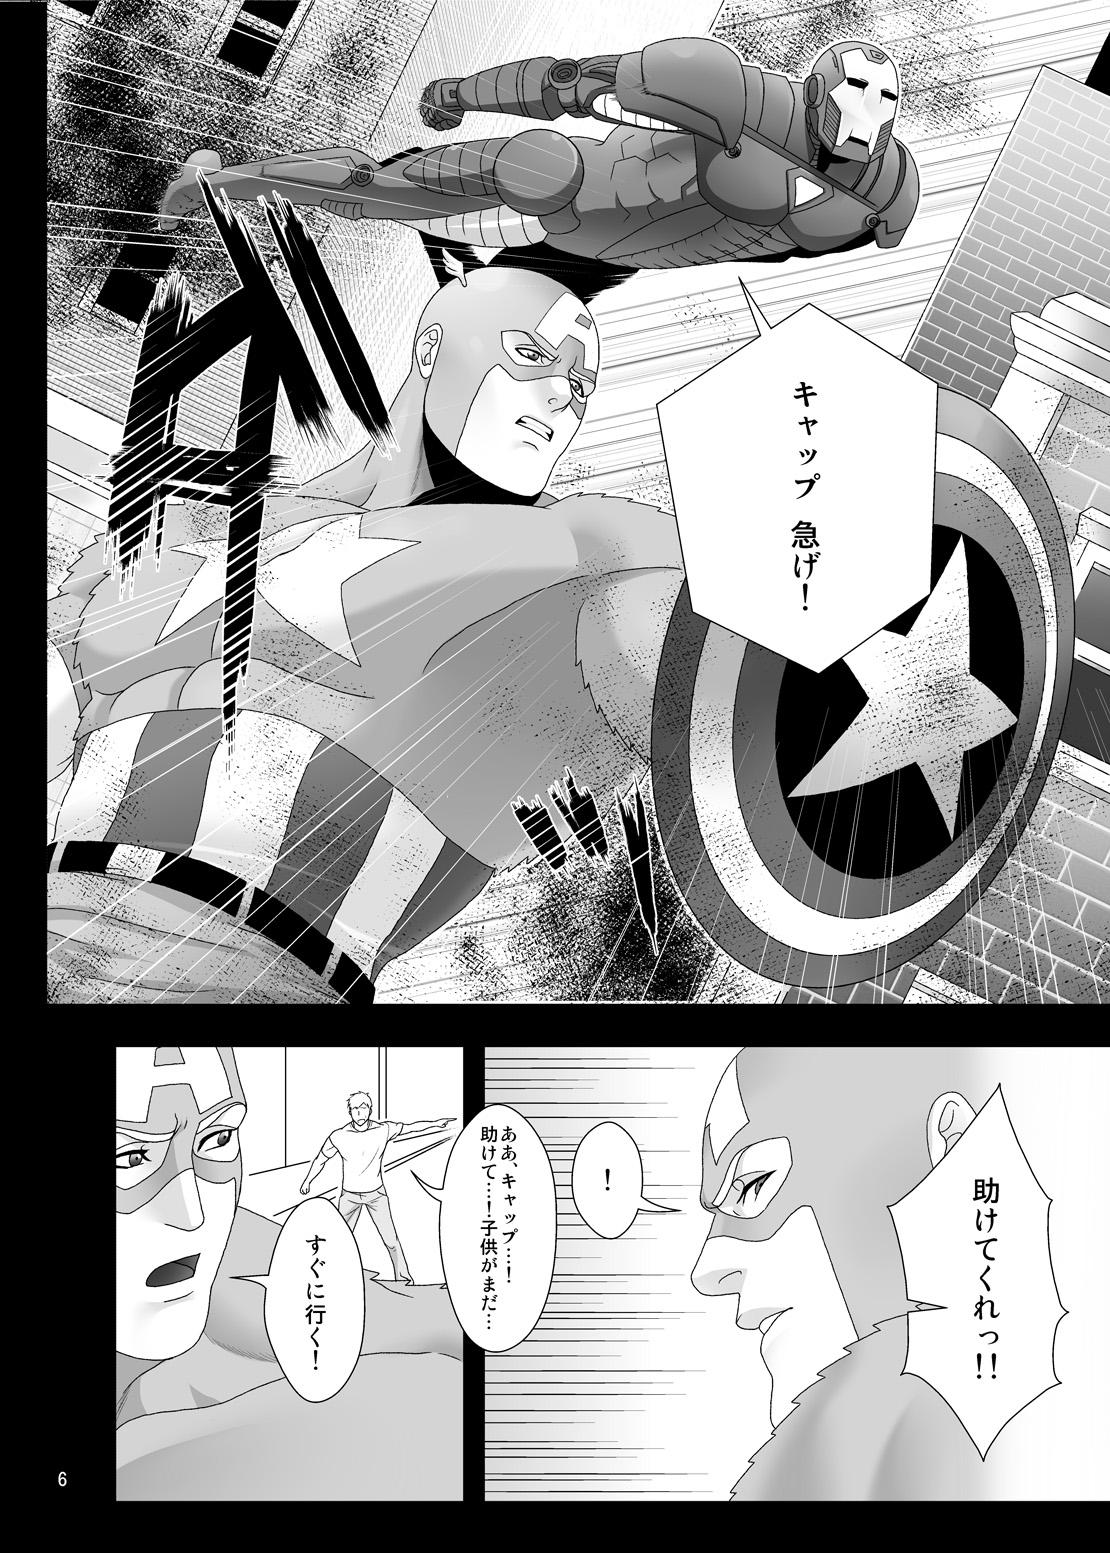 Interracial from: your biggest fan - Avengers Peeing - Page 5